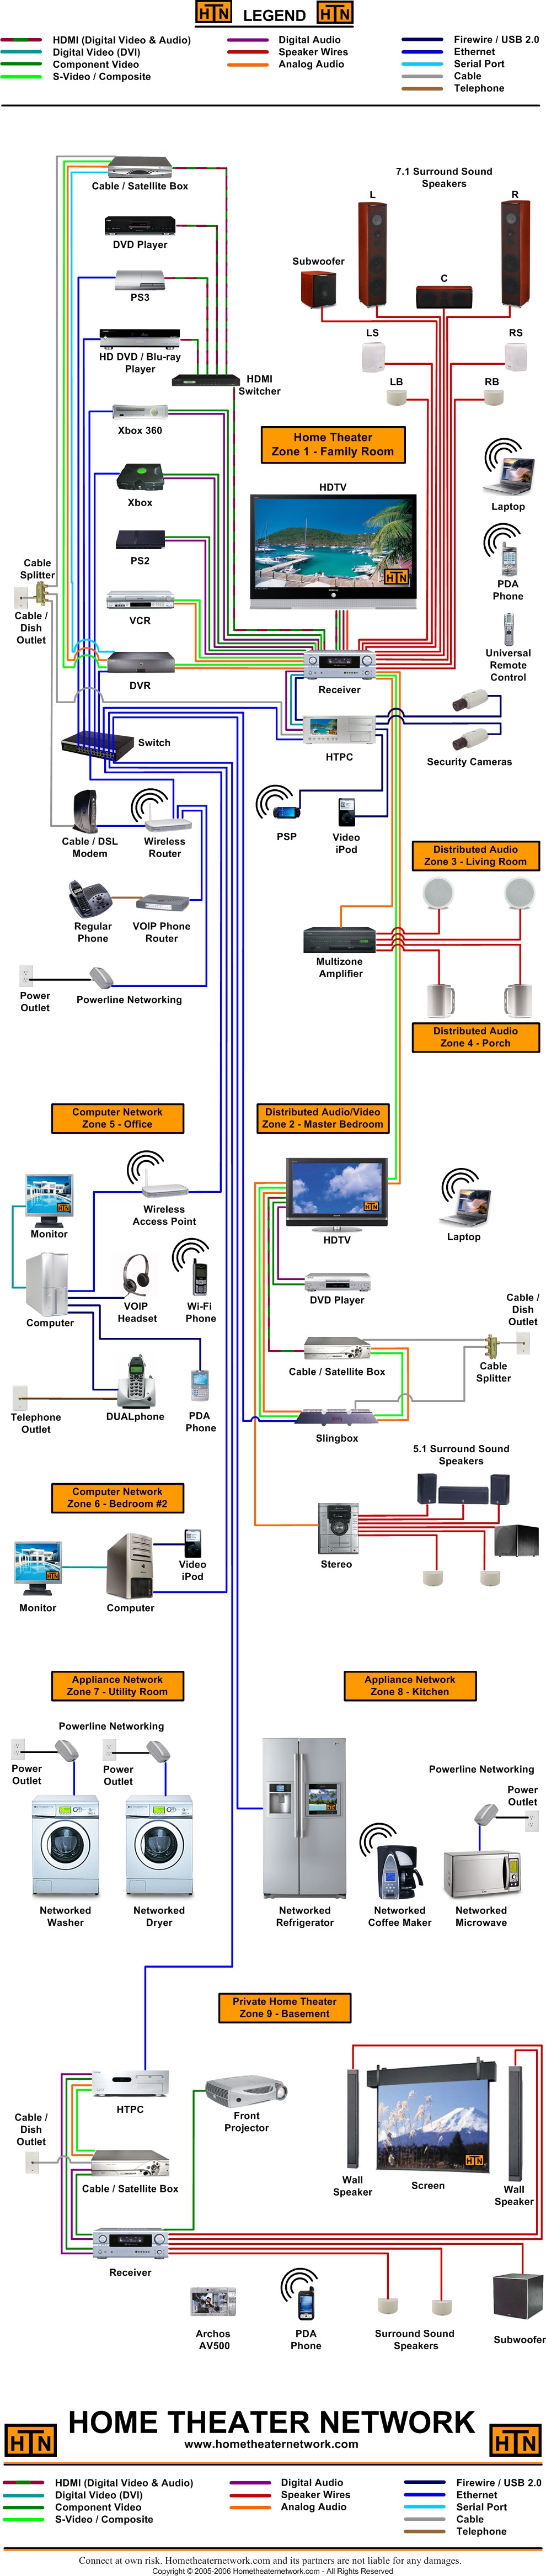 Home_Theater_Network_large_Connection_diagram_1.jpg